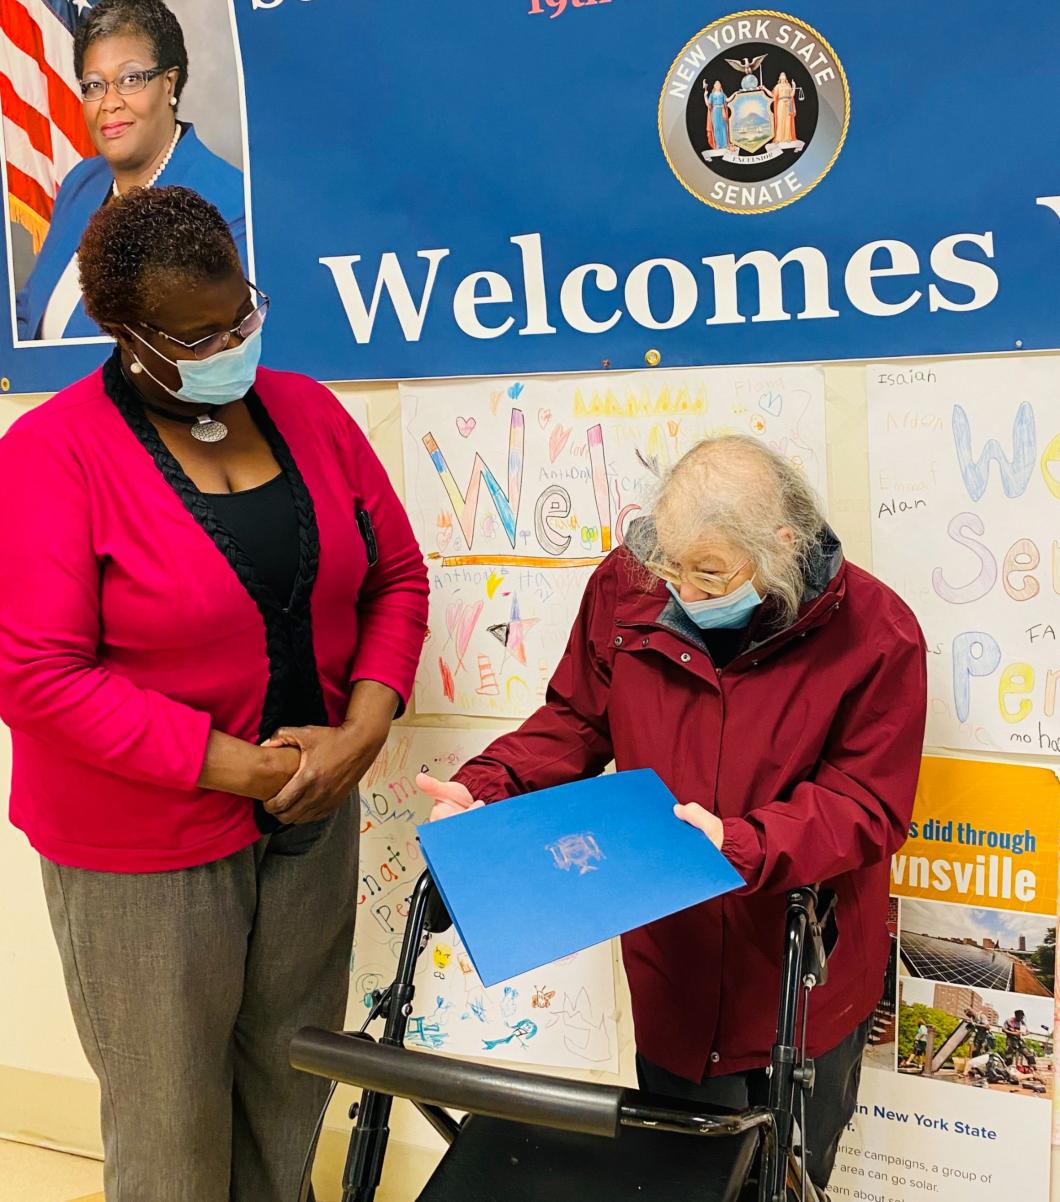 Two women wearing masks standing in front of a sign that reads "Welcomes.." woman on right is using a walking and holding a blue folder. Woman on left looks down at her.